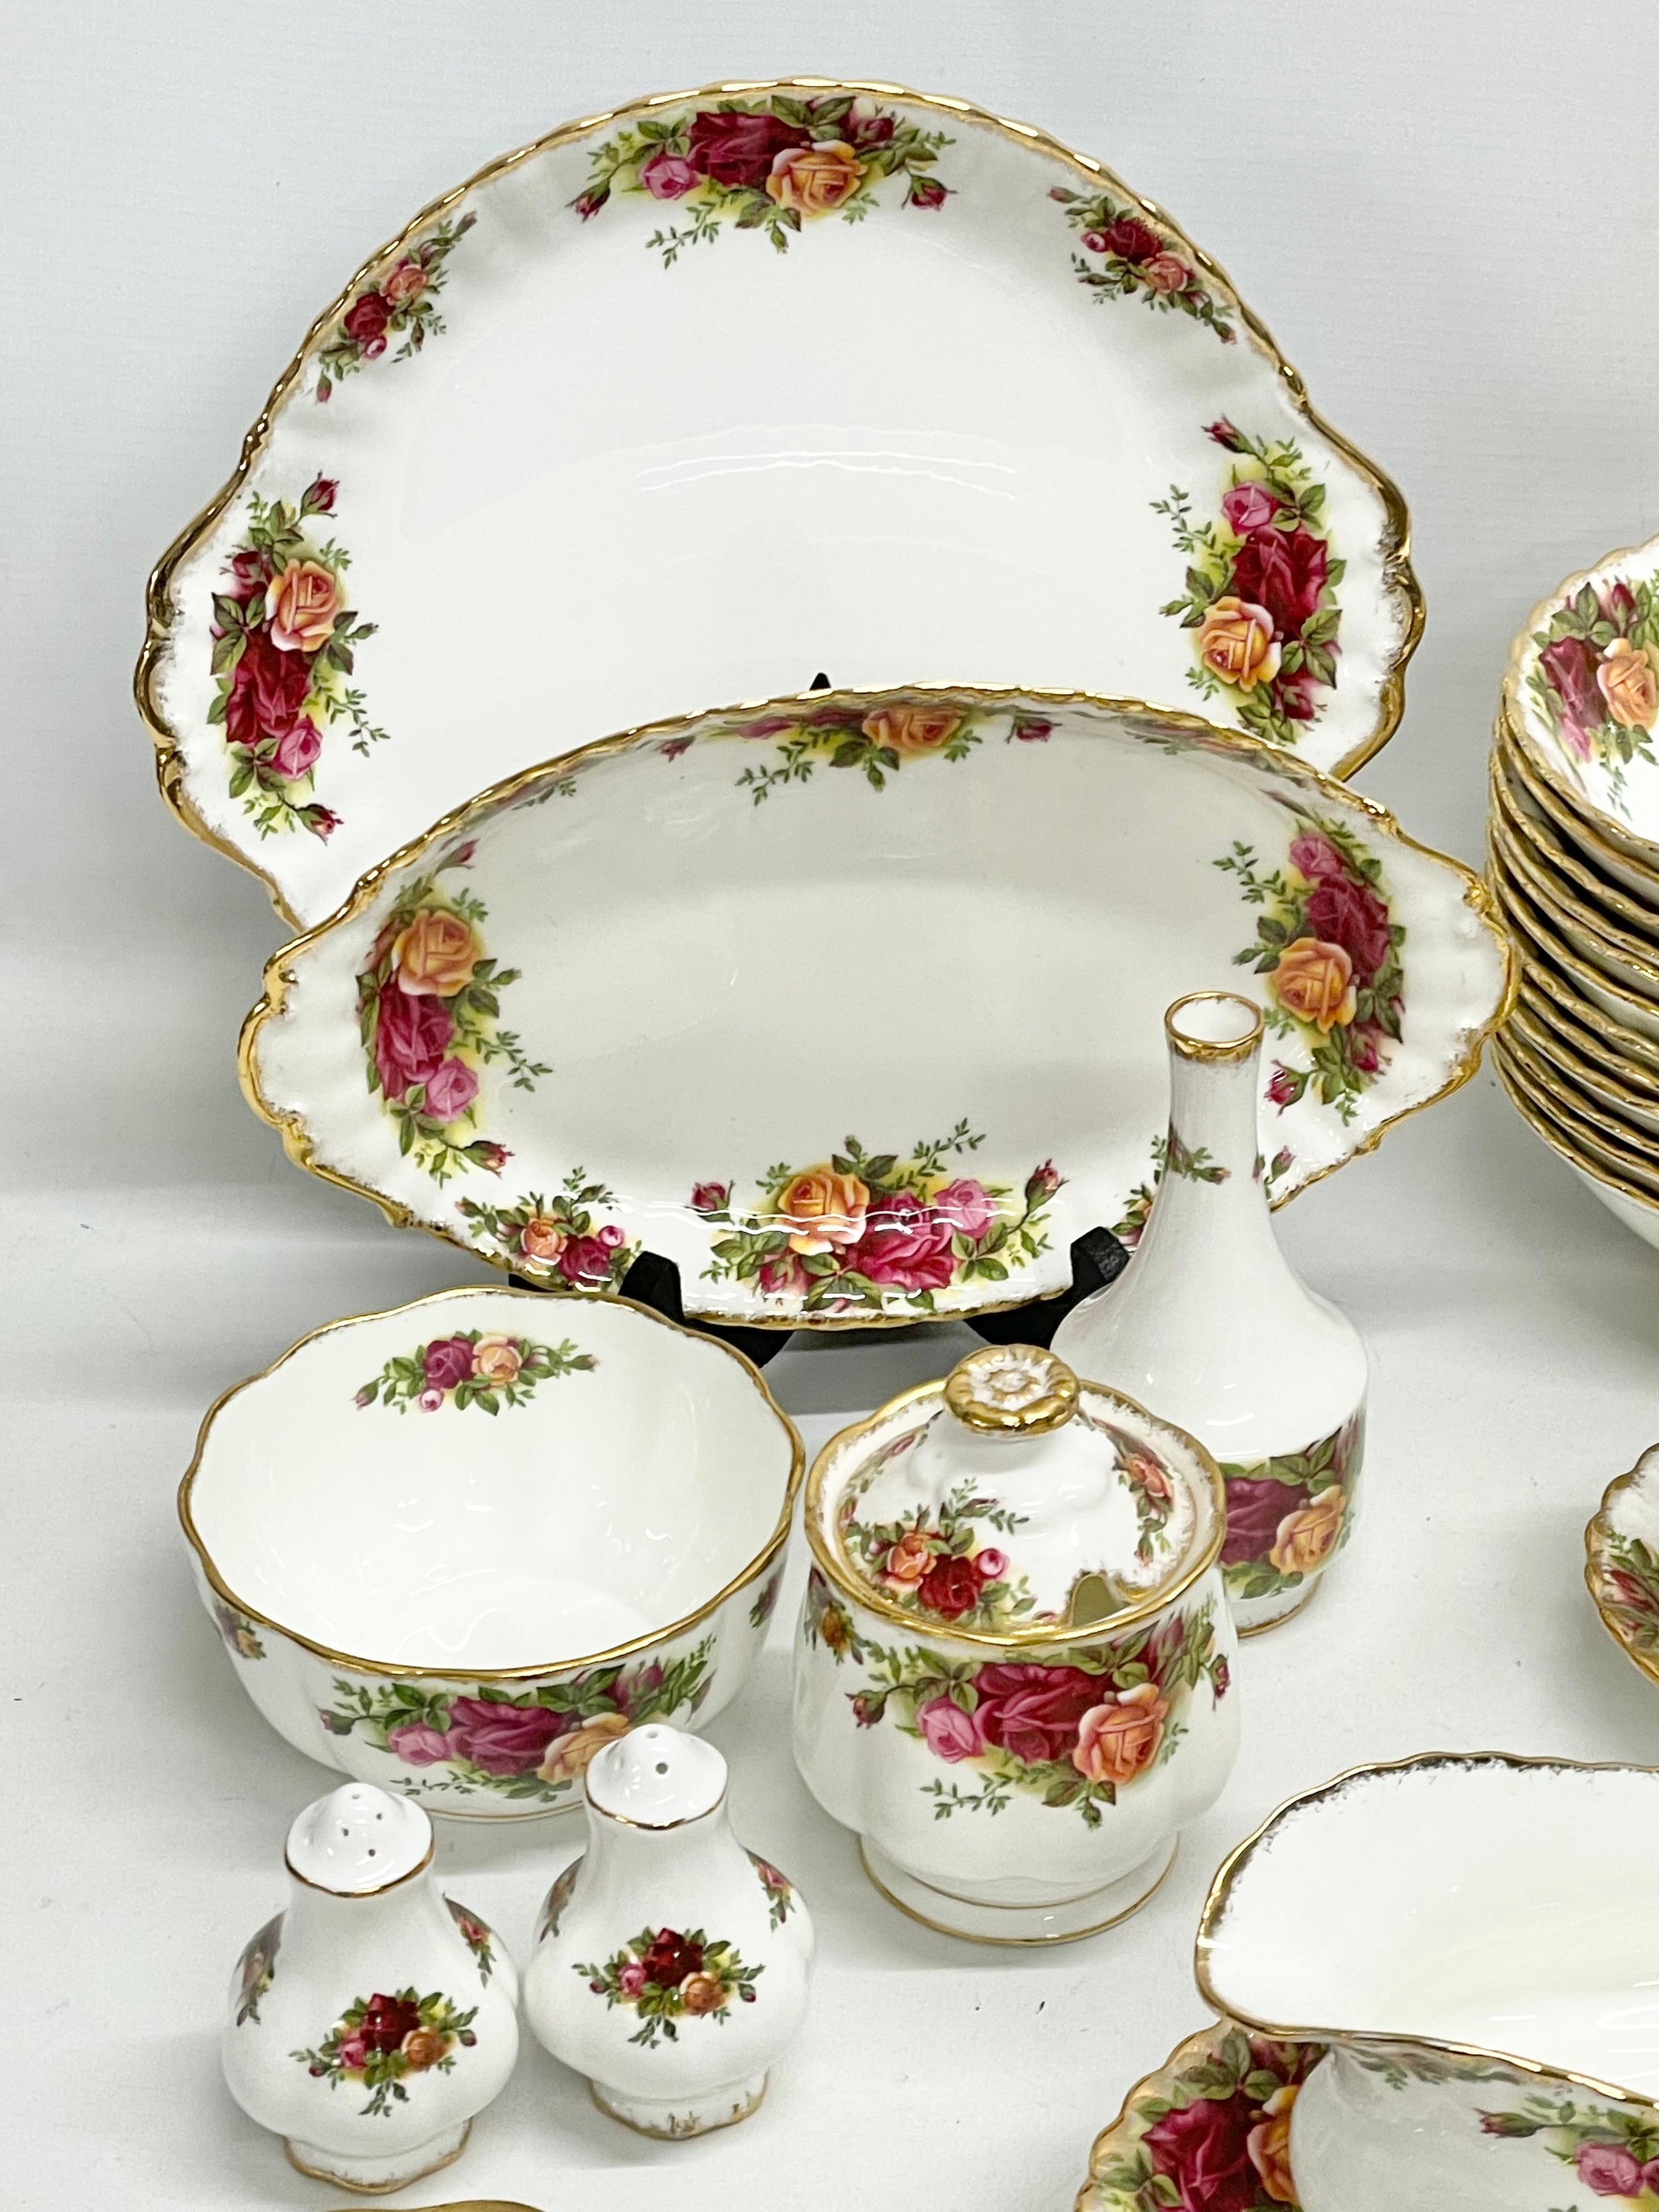 43 pieces of Royal Albert ‘Old Country Roses’ tea and dinner ware. A pair of gravy boats with - Image 8 of 8